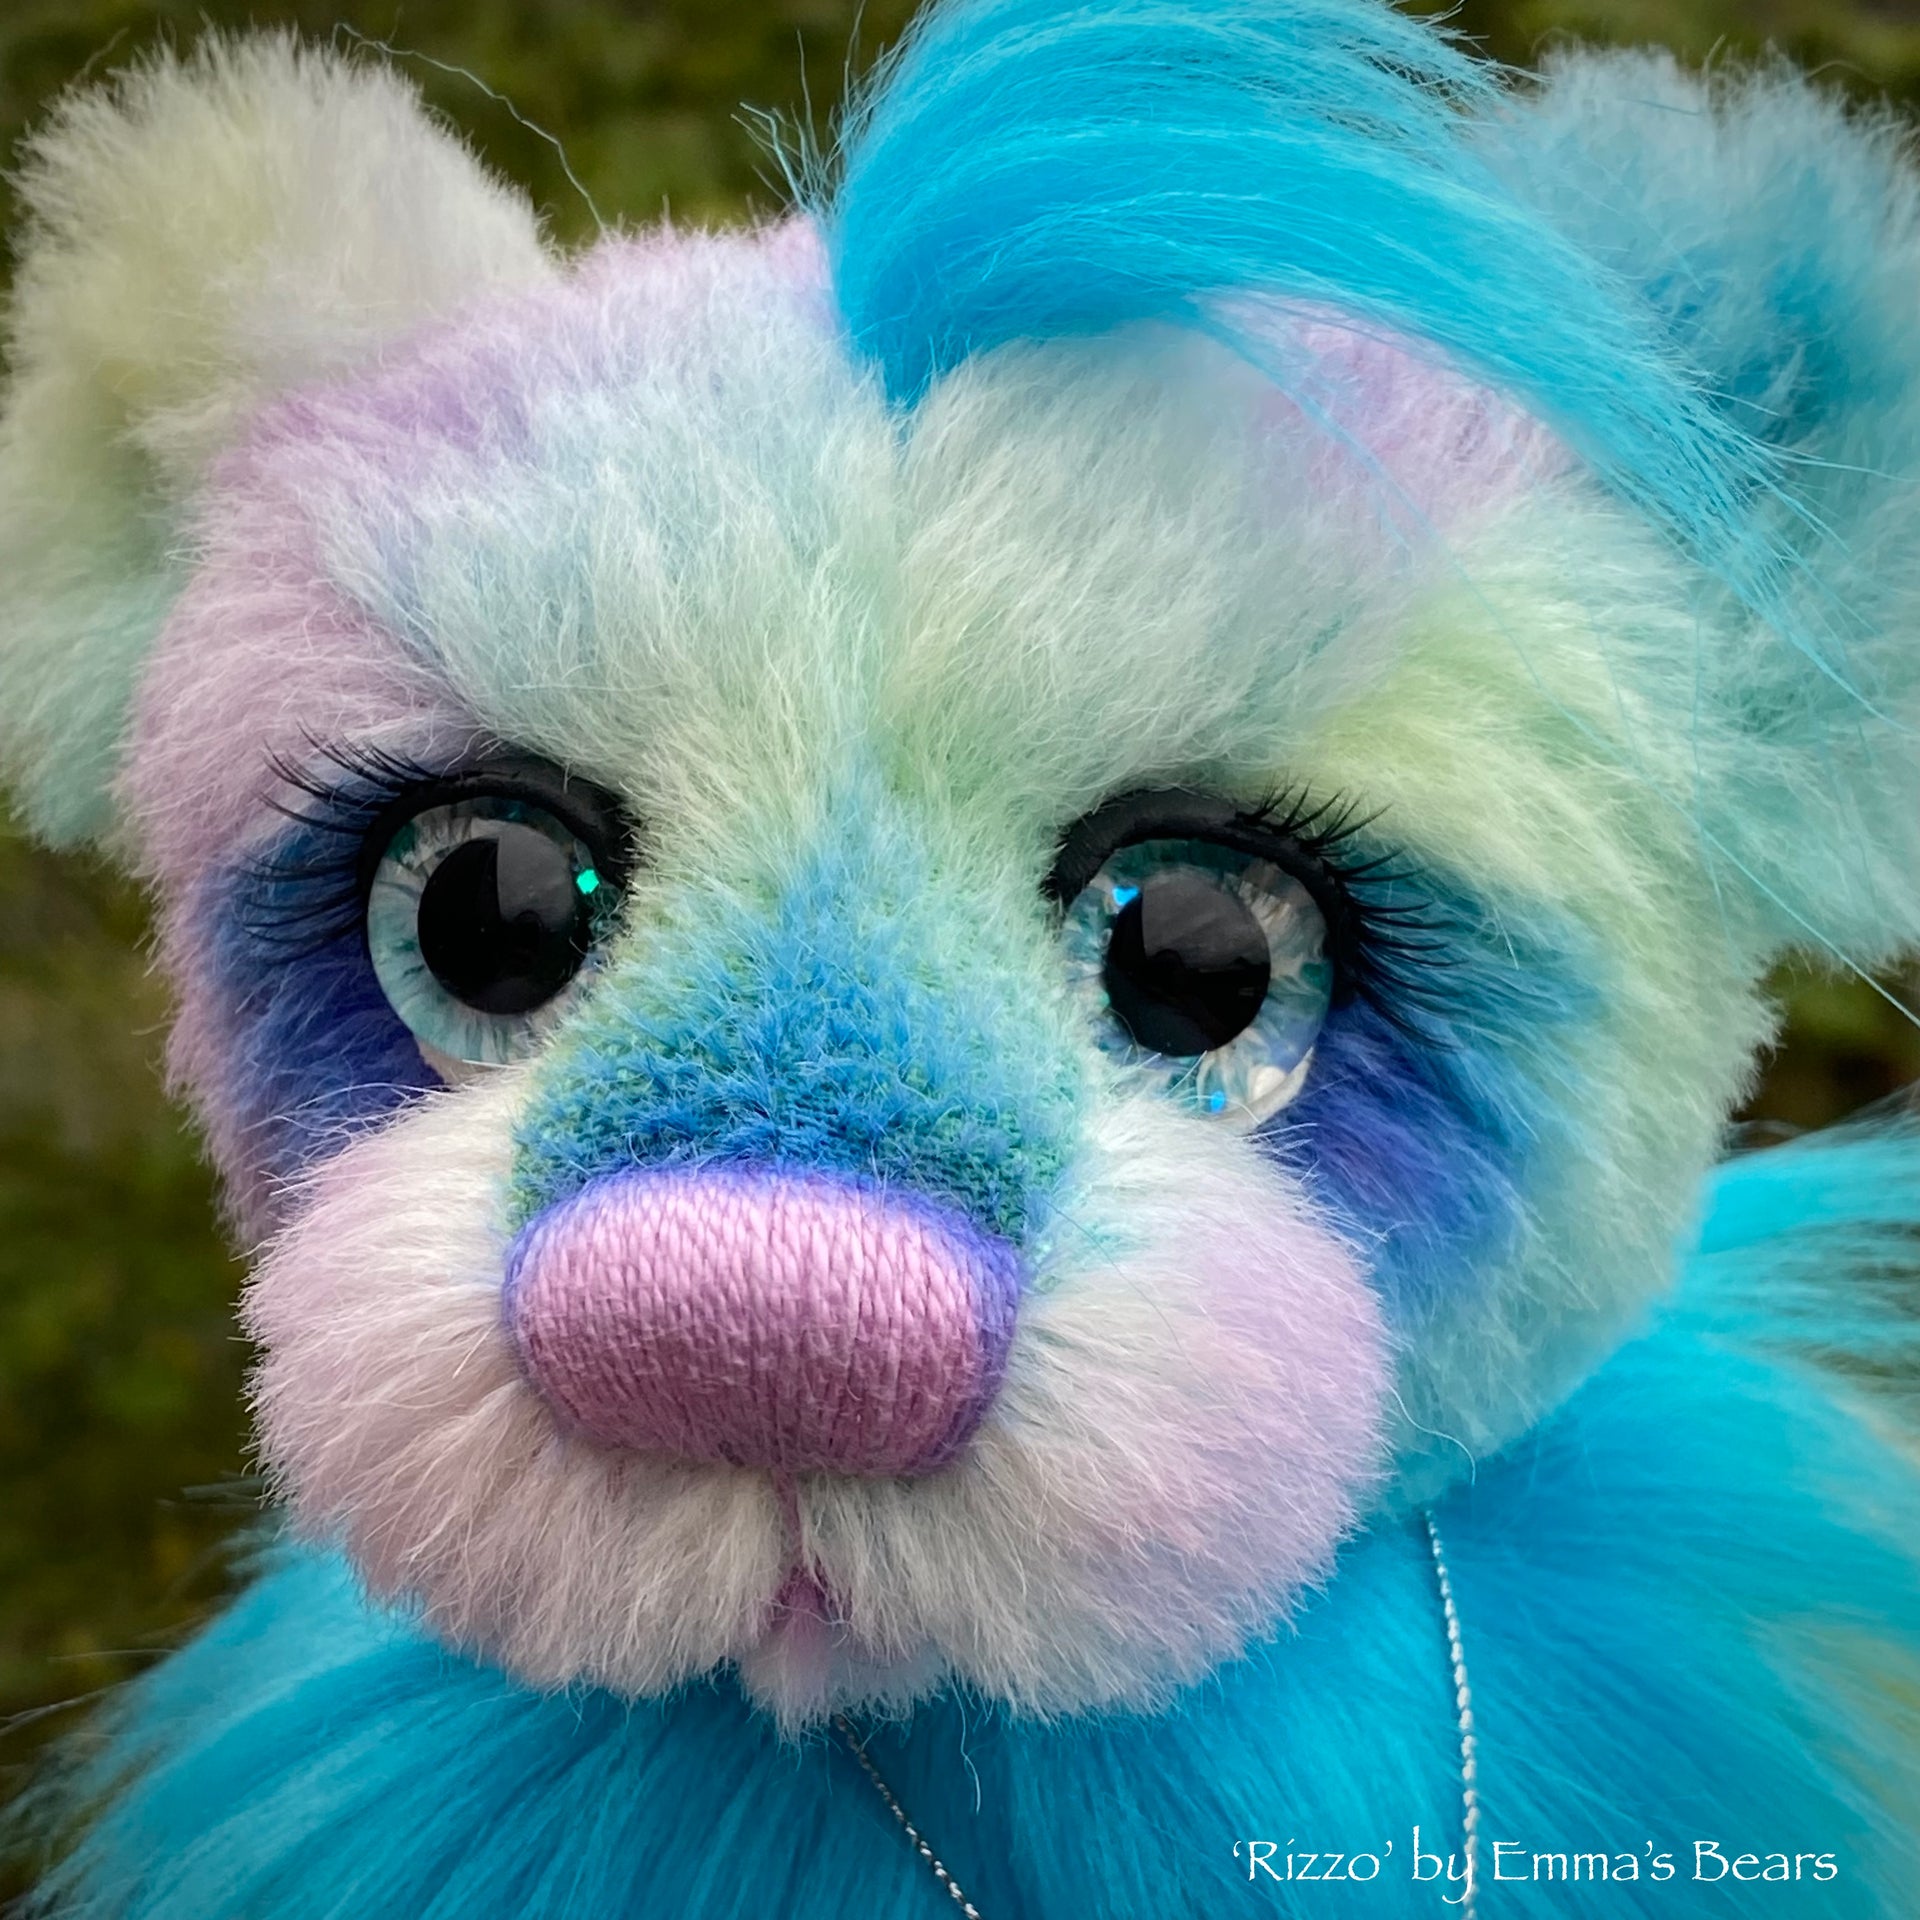 Rizzo - 12" Hand-Dyed Alpaca and faux fur artist bear by Emma's Bears - OOAK